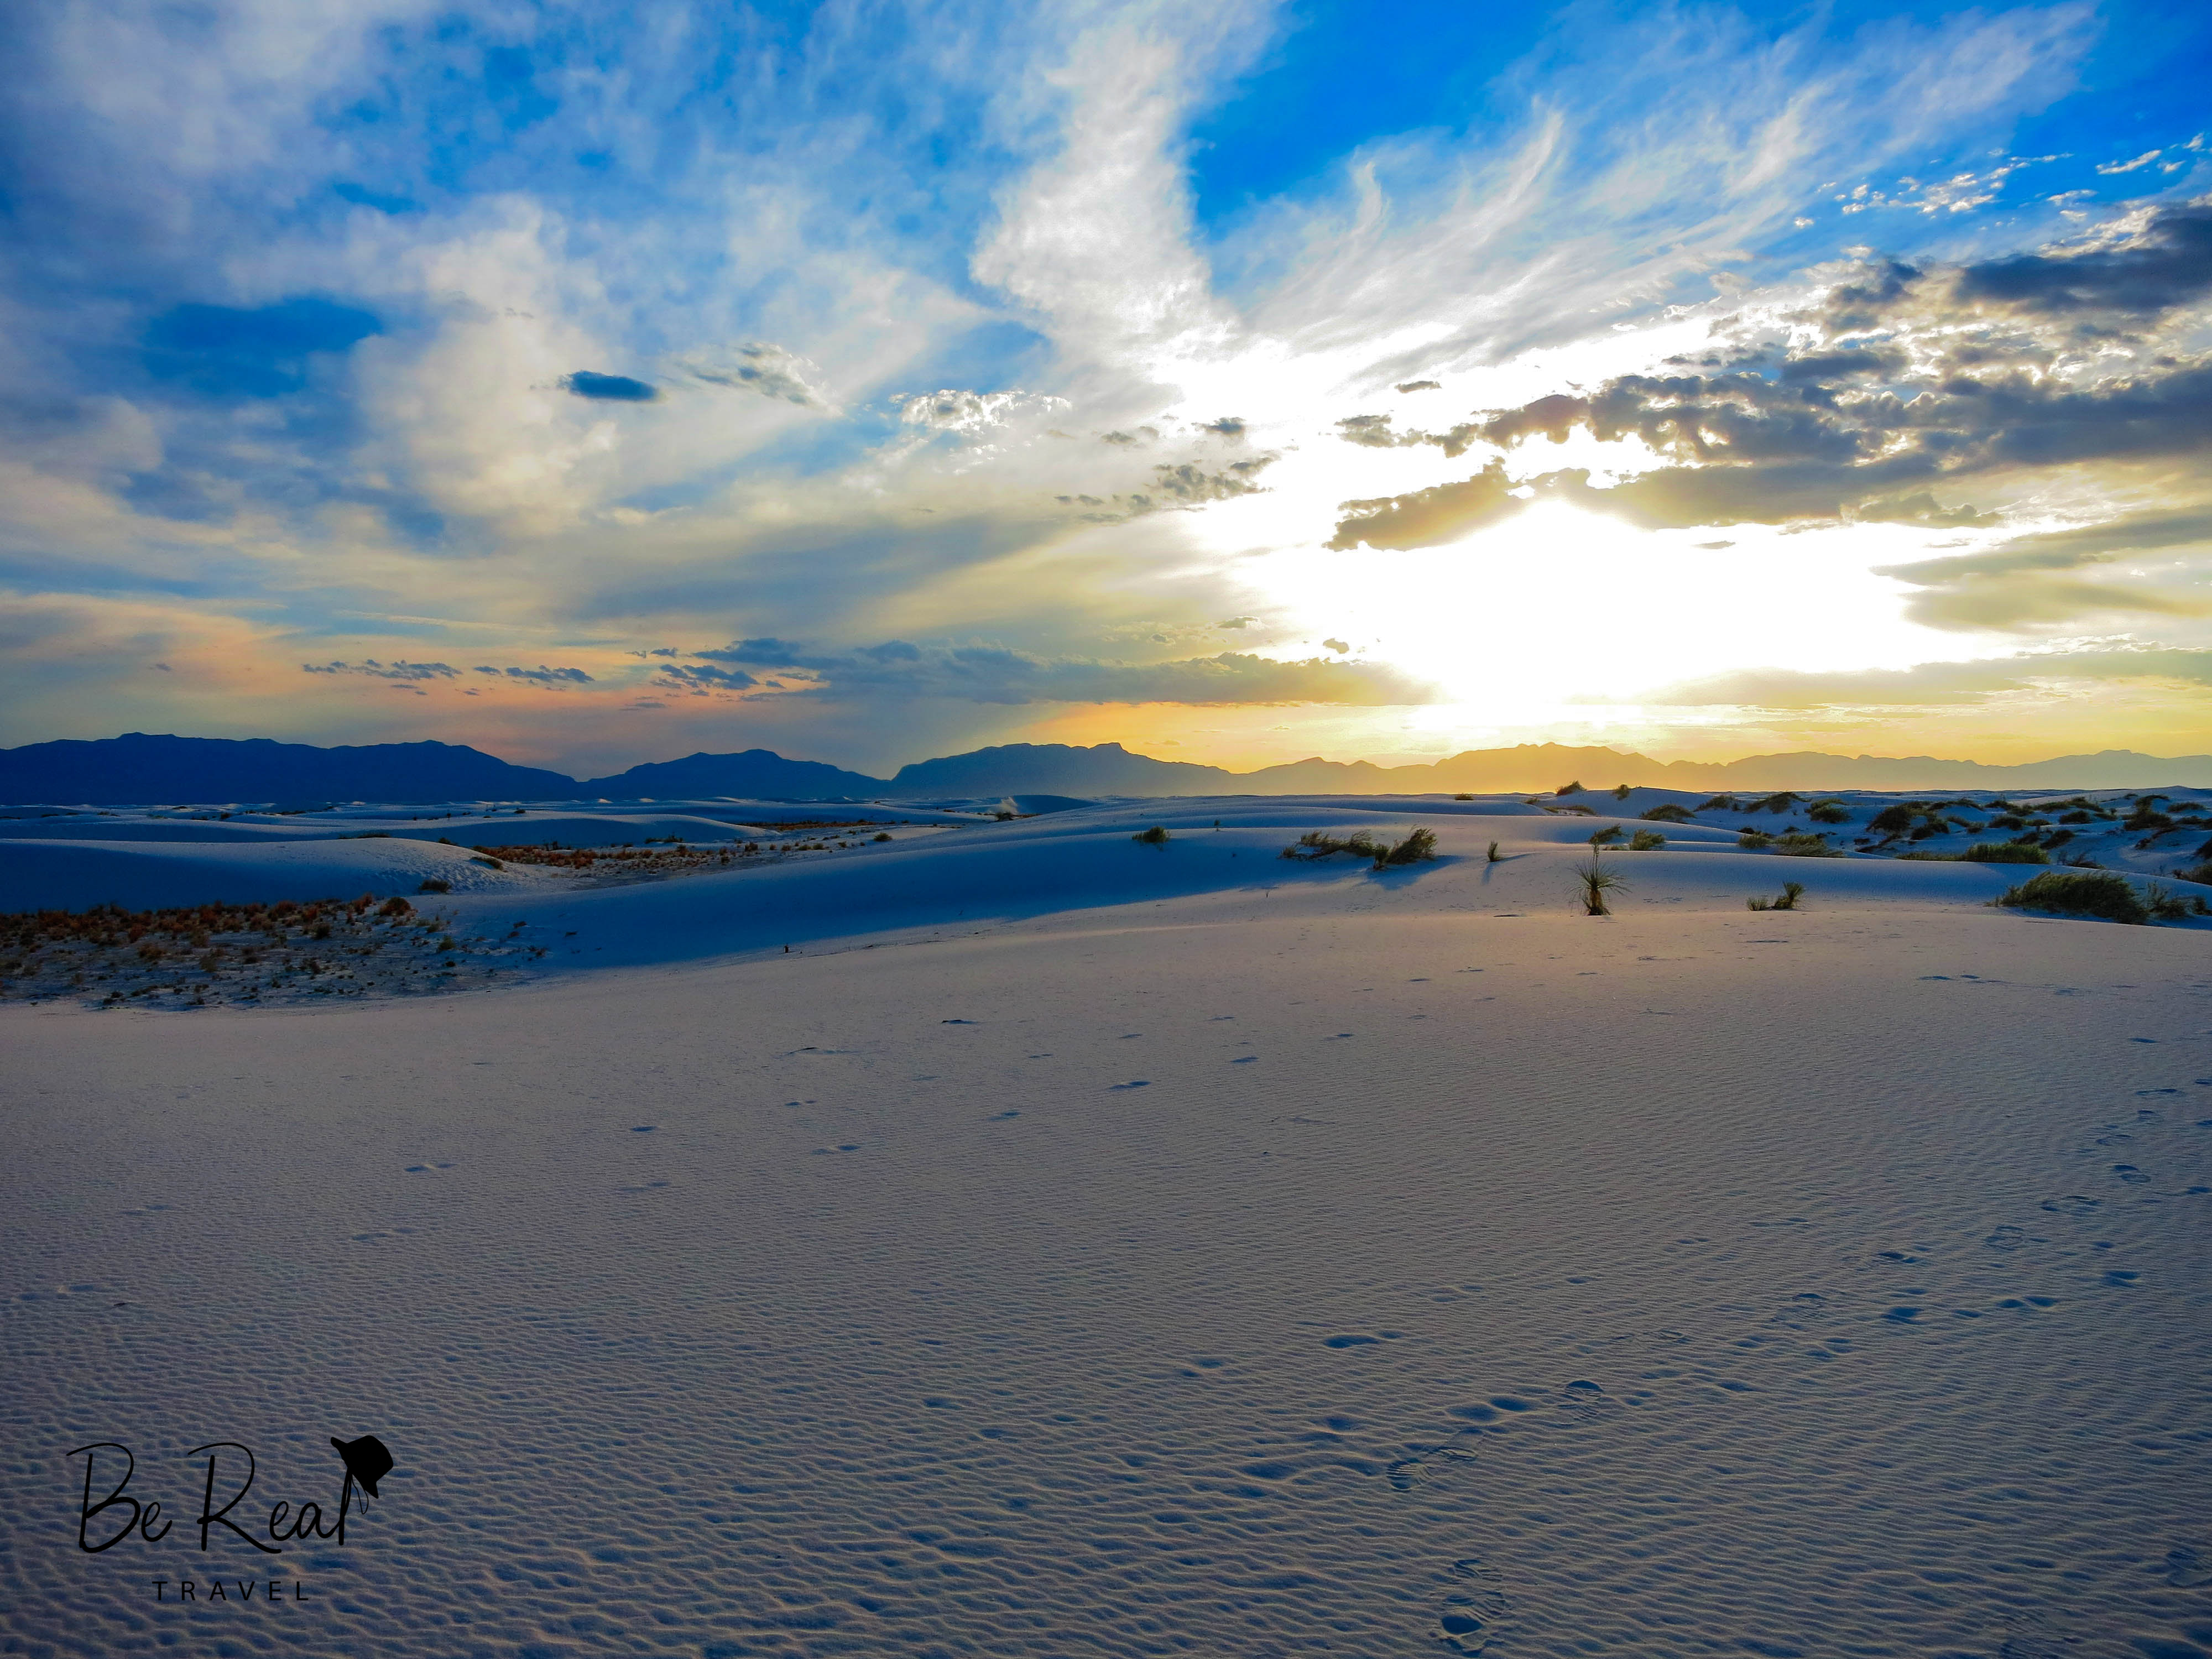 The sun sets above the sand at White Sands National Park, New Mexico